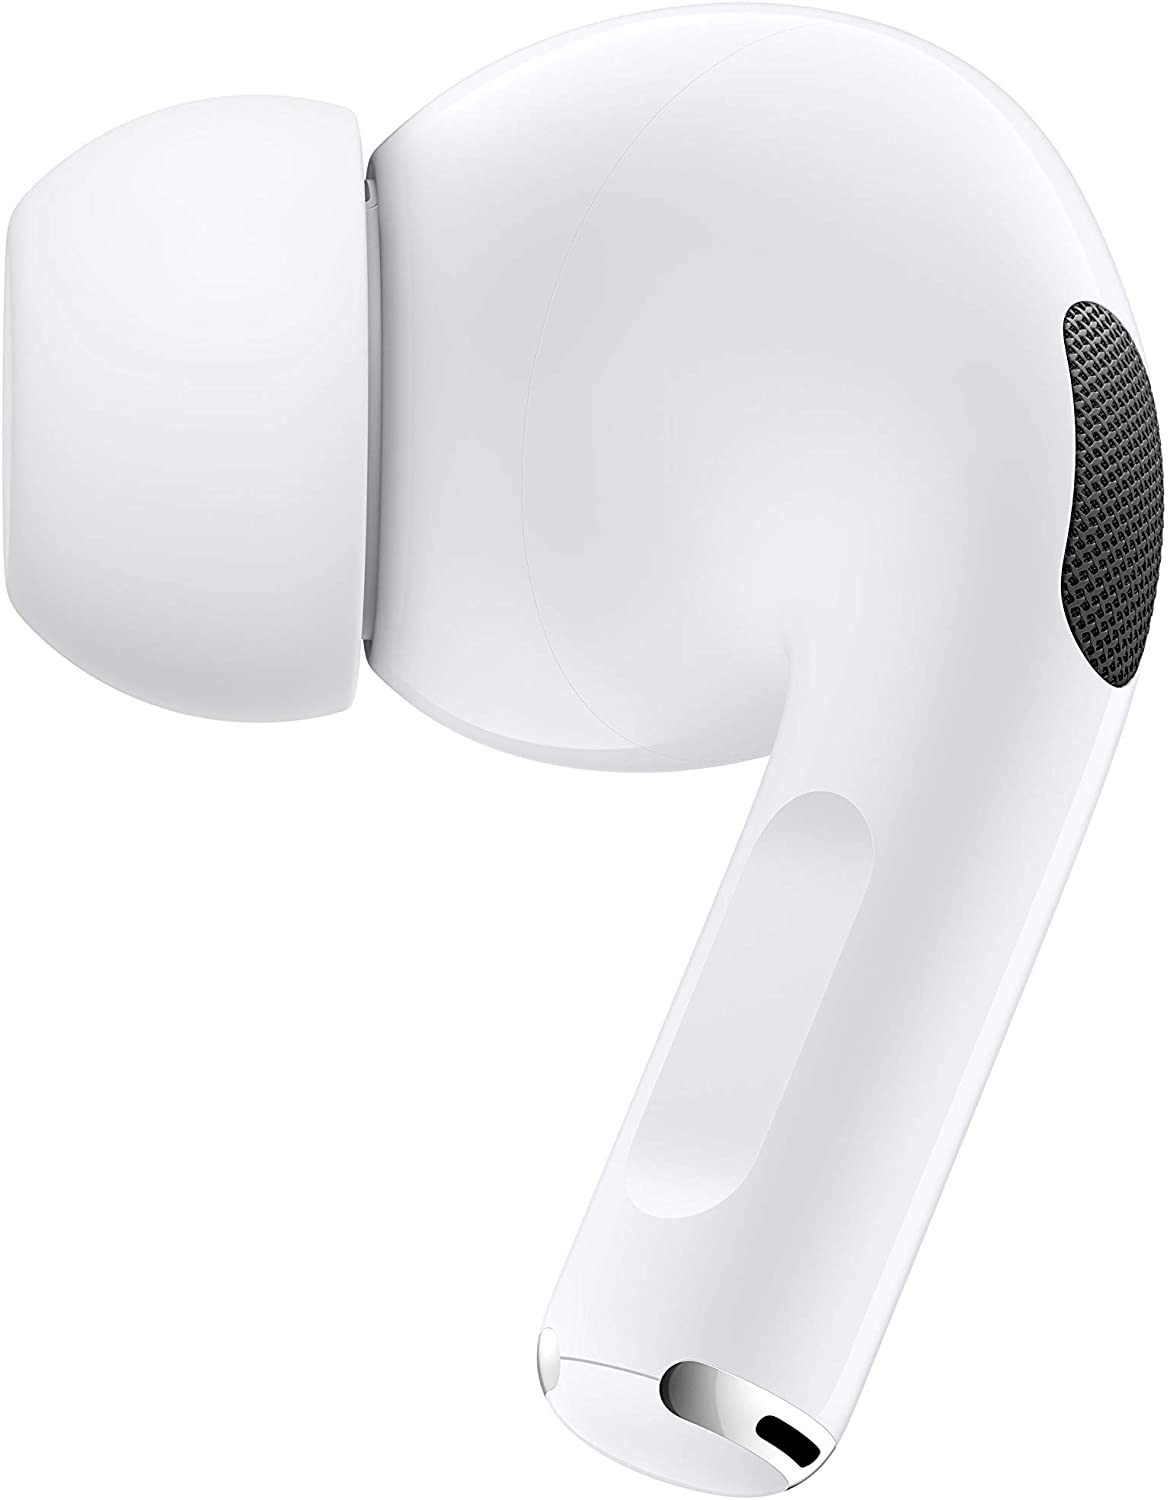 AirPods Pro エアーポッズプロ　ホワイト MWP22ZM/A